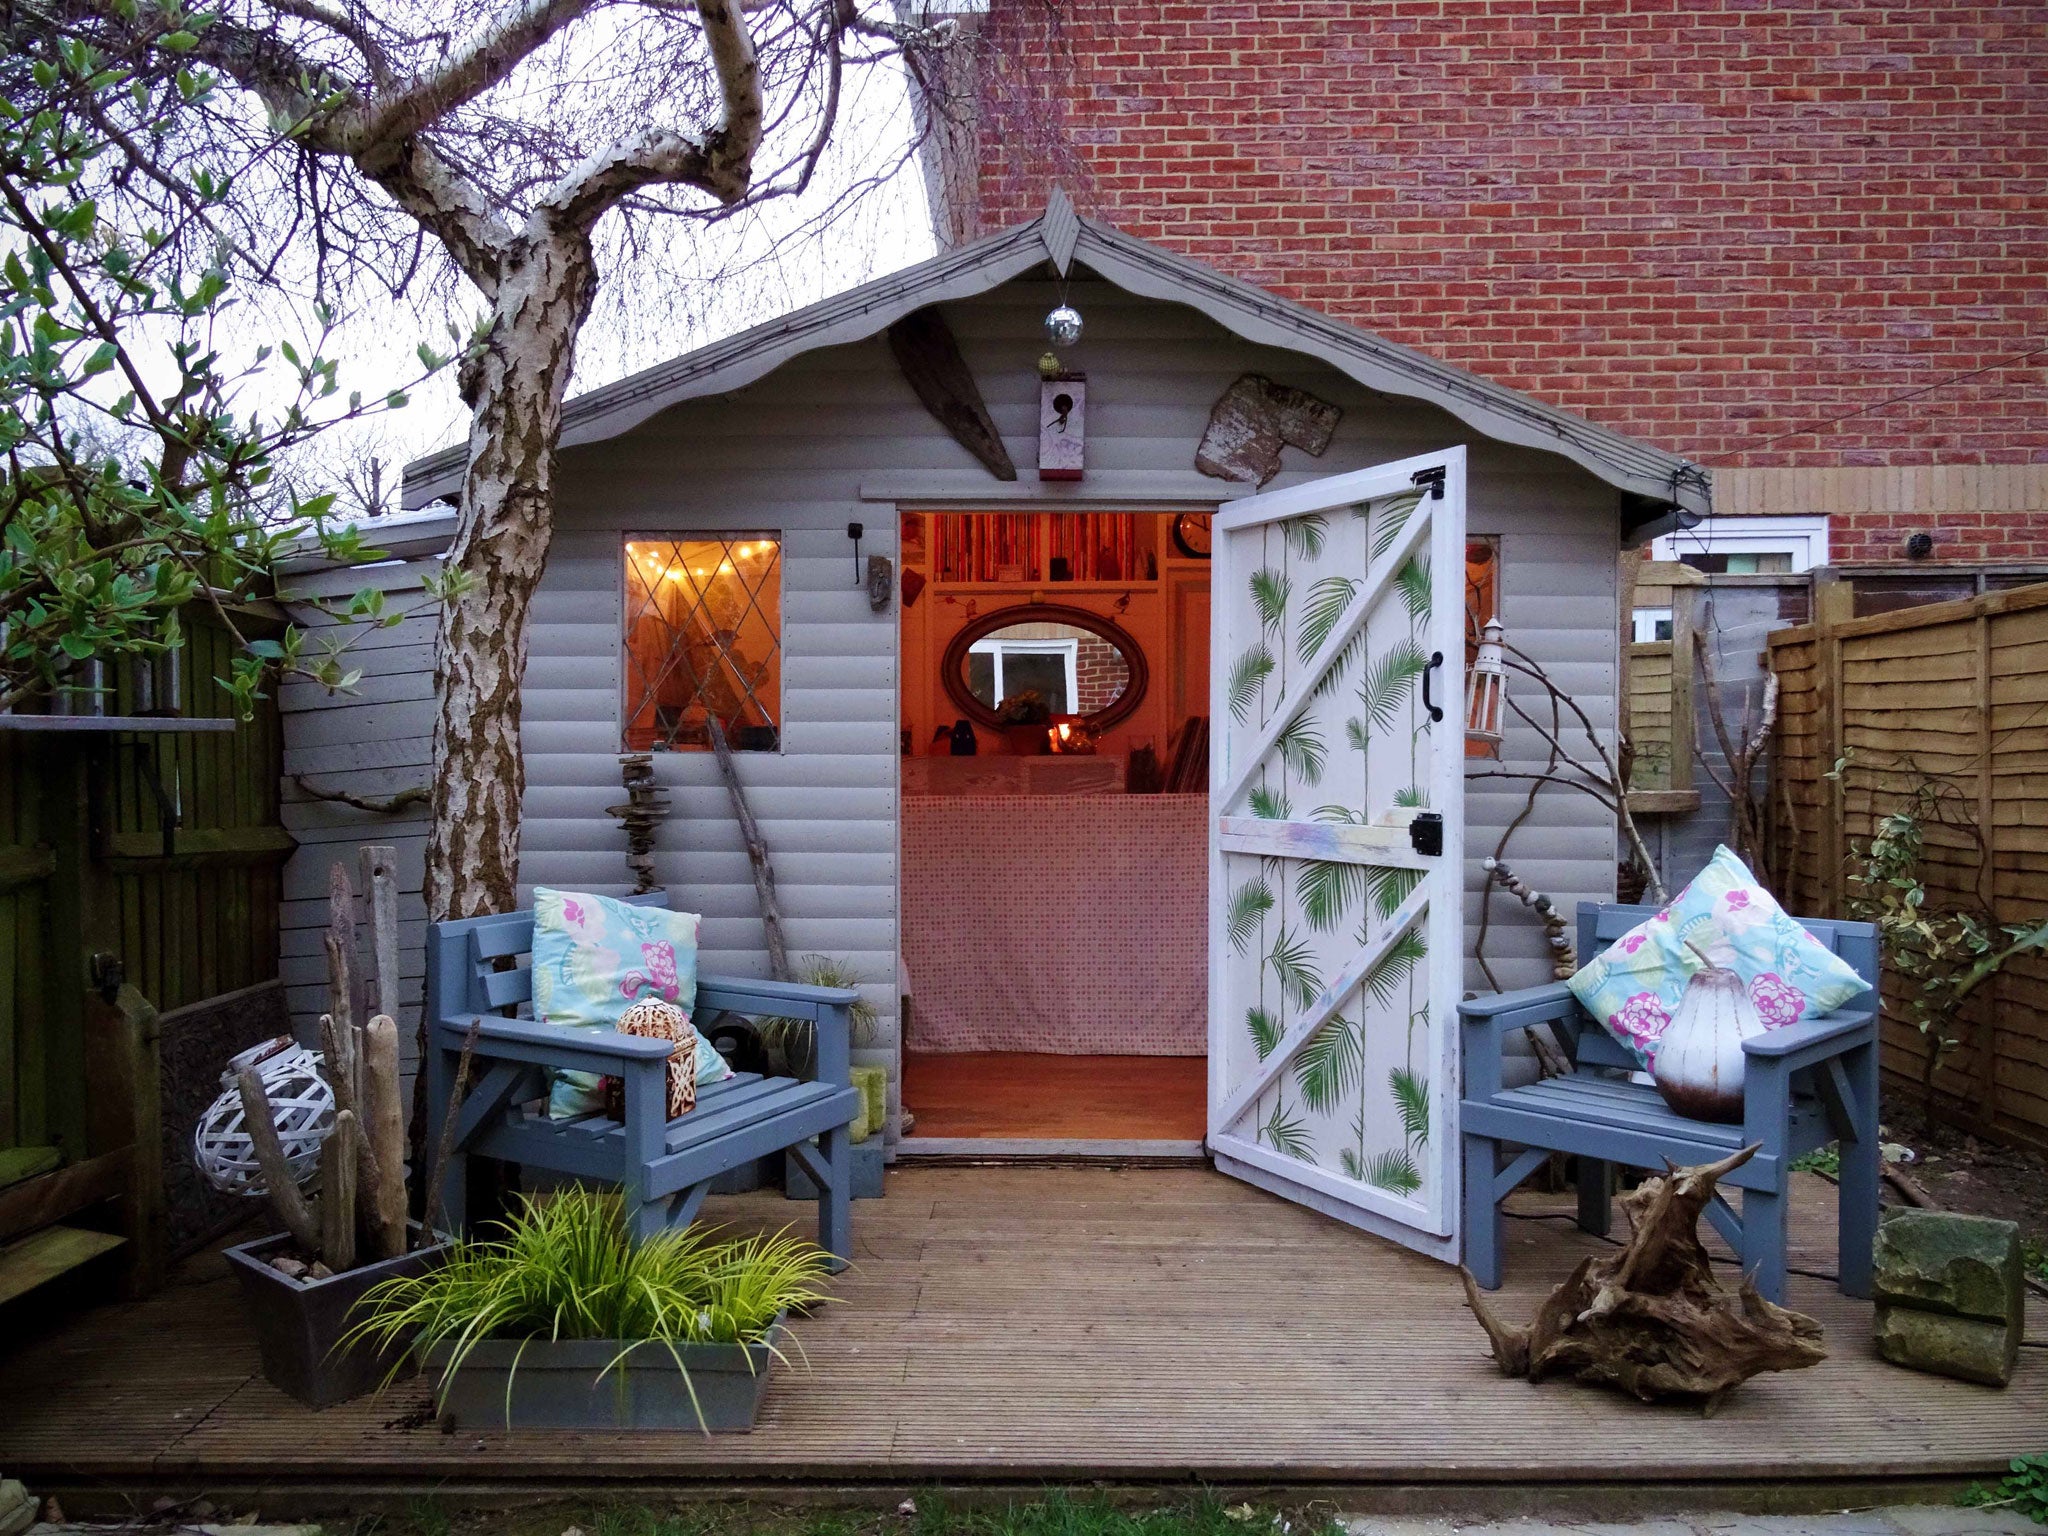 A shed painted to look like a beach retreat